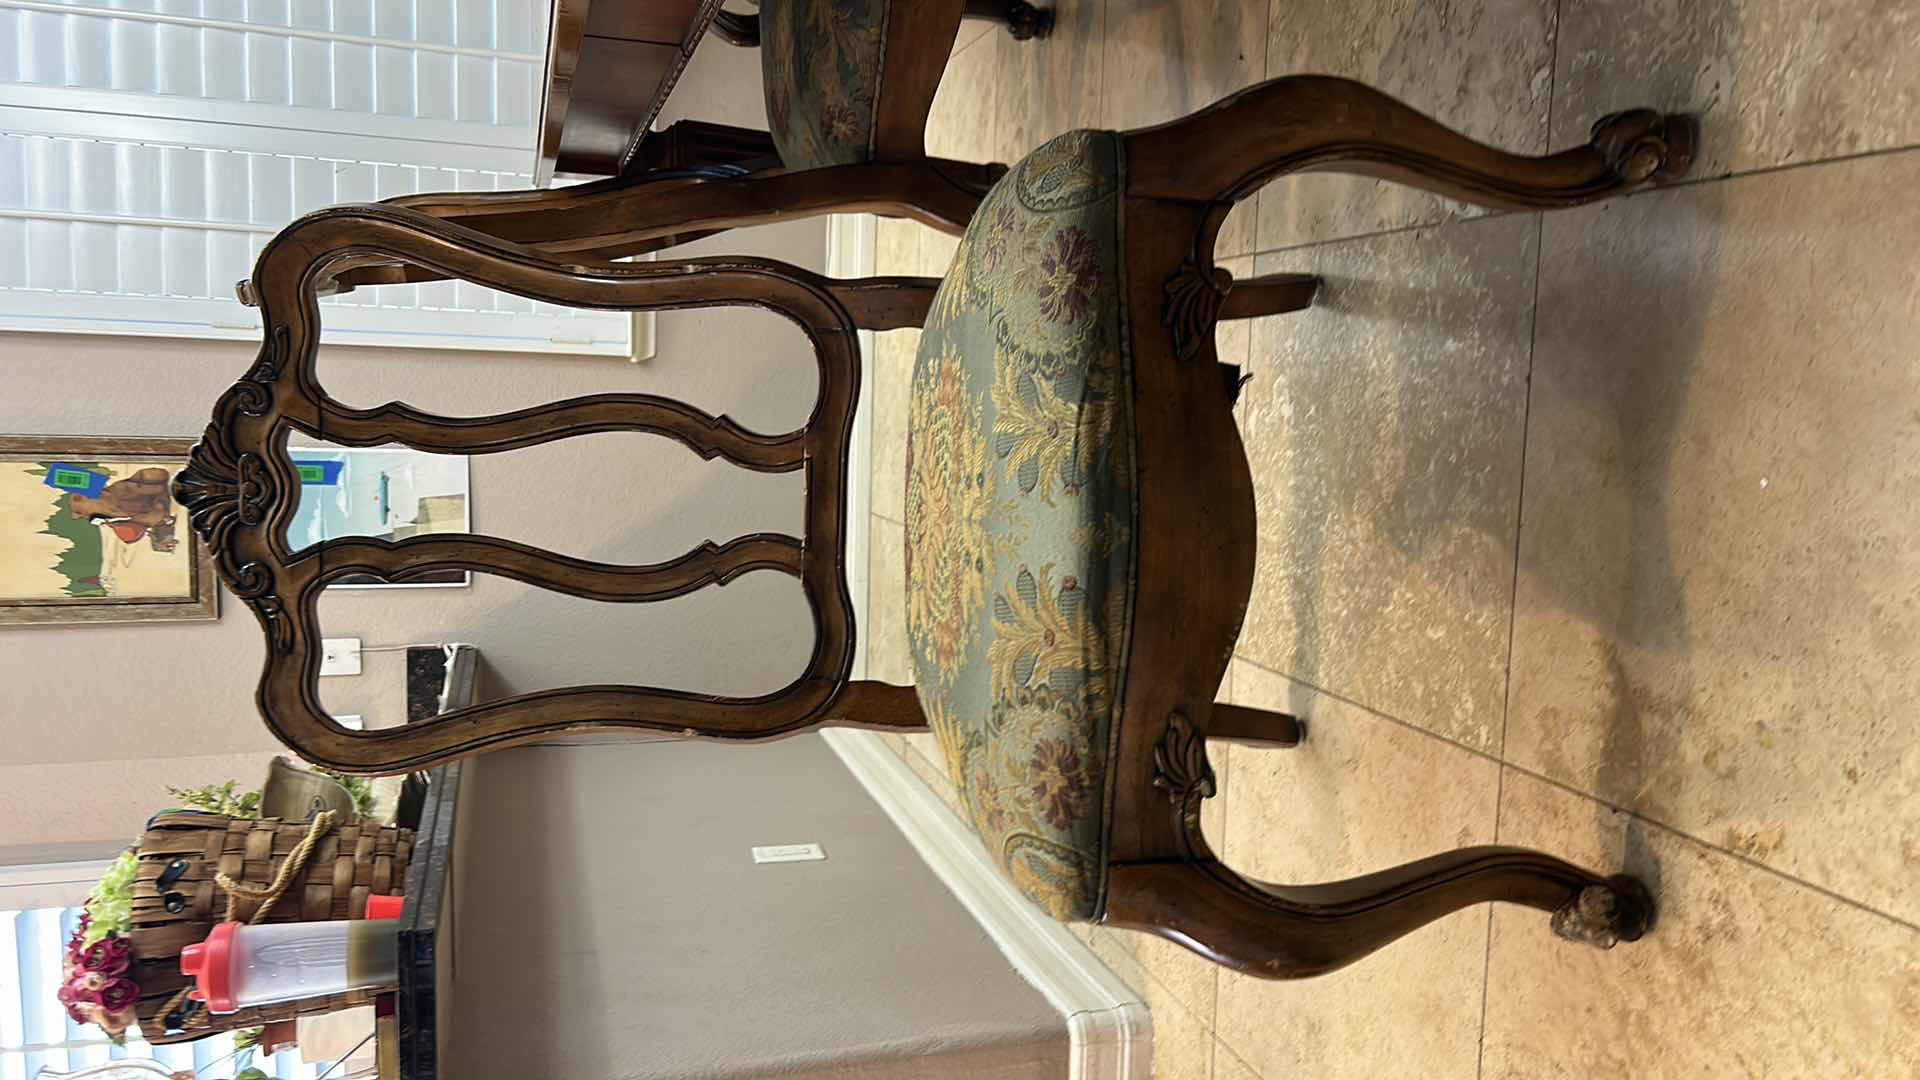 Photo 8 of ETHAN ALLEN RECTANGLE DINING TABLE 46” x 72” x 30” SERIAL NO 67514 $1499 CHAIRS $2741 - HAS TWO LEAFS